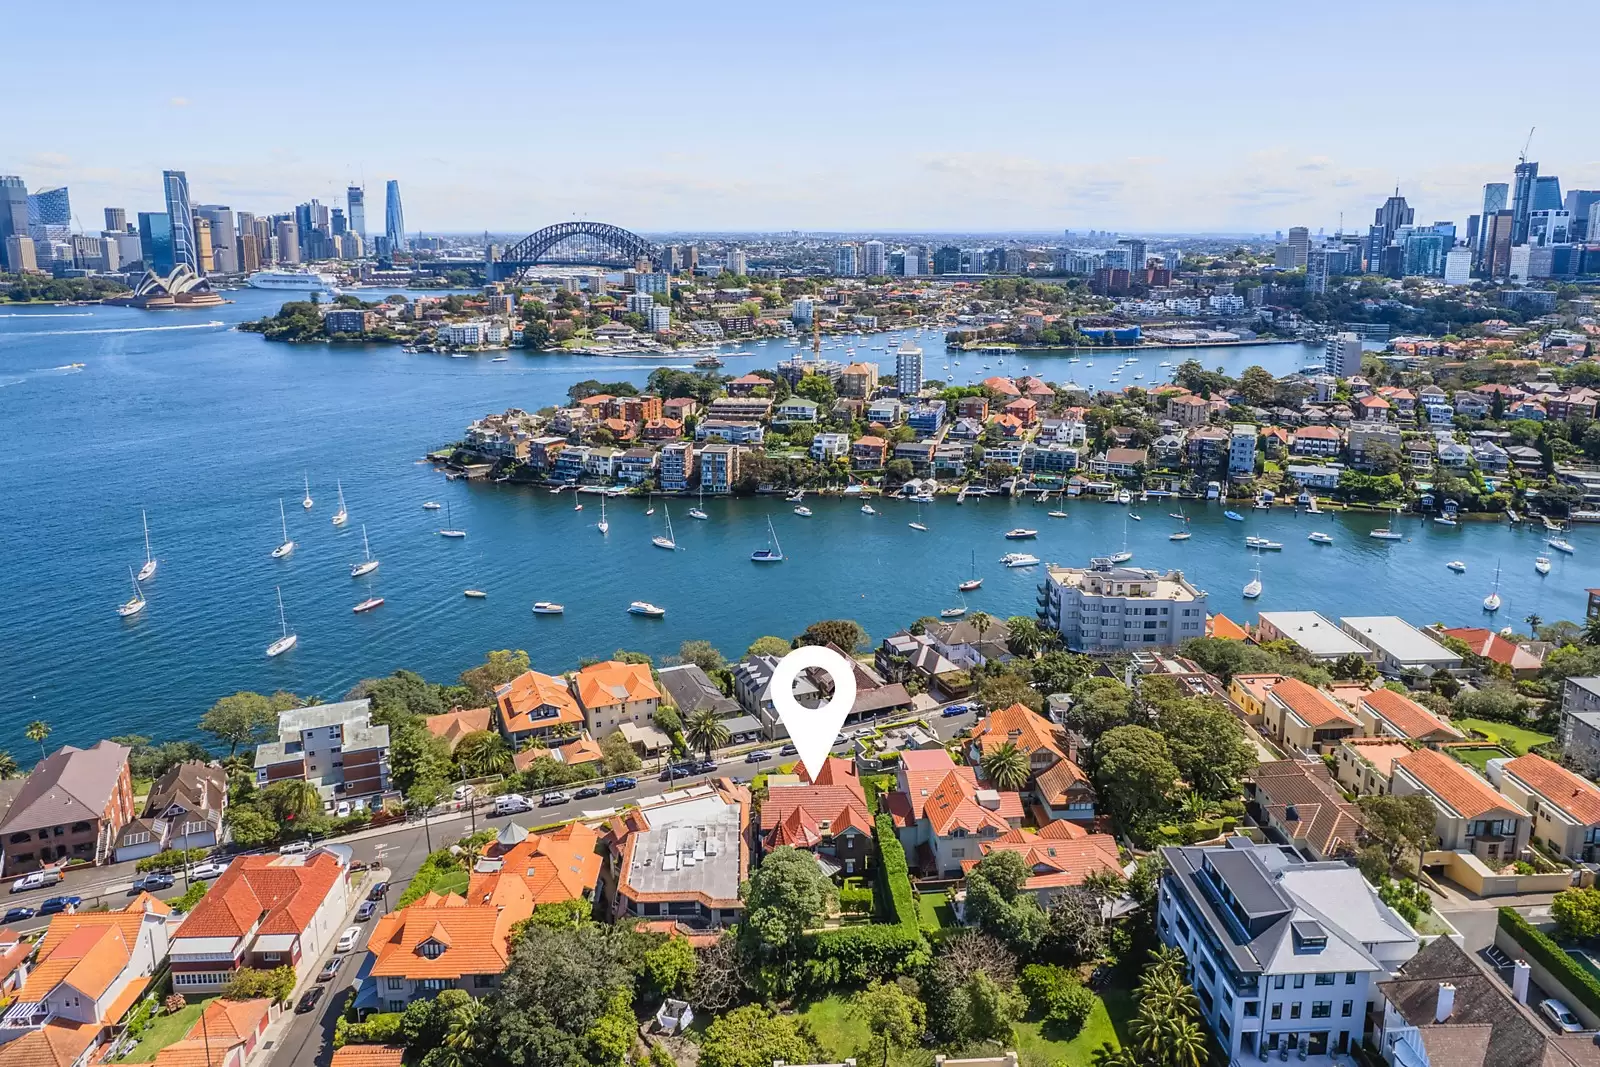 Photo #17: 29 Milson Road, Cremorne Point - Sold by Sydney Sotheby's International Realty